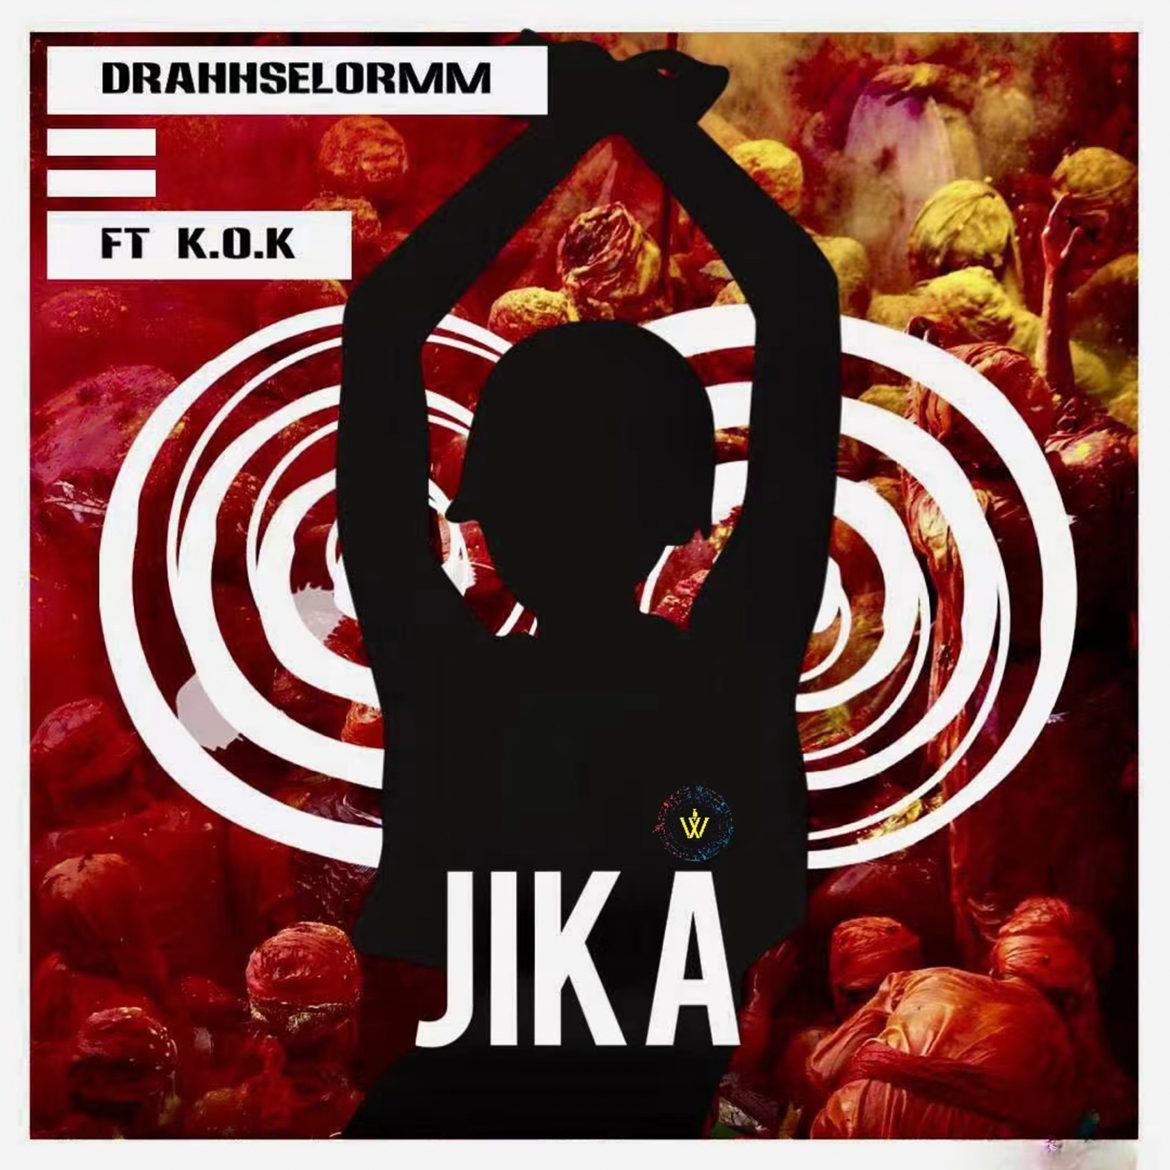 South African Fans are thrilled as ‘Drahhselormm’ drops new super powered single ‘Jika’ onto the Bafana FM Africa playlist.